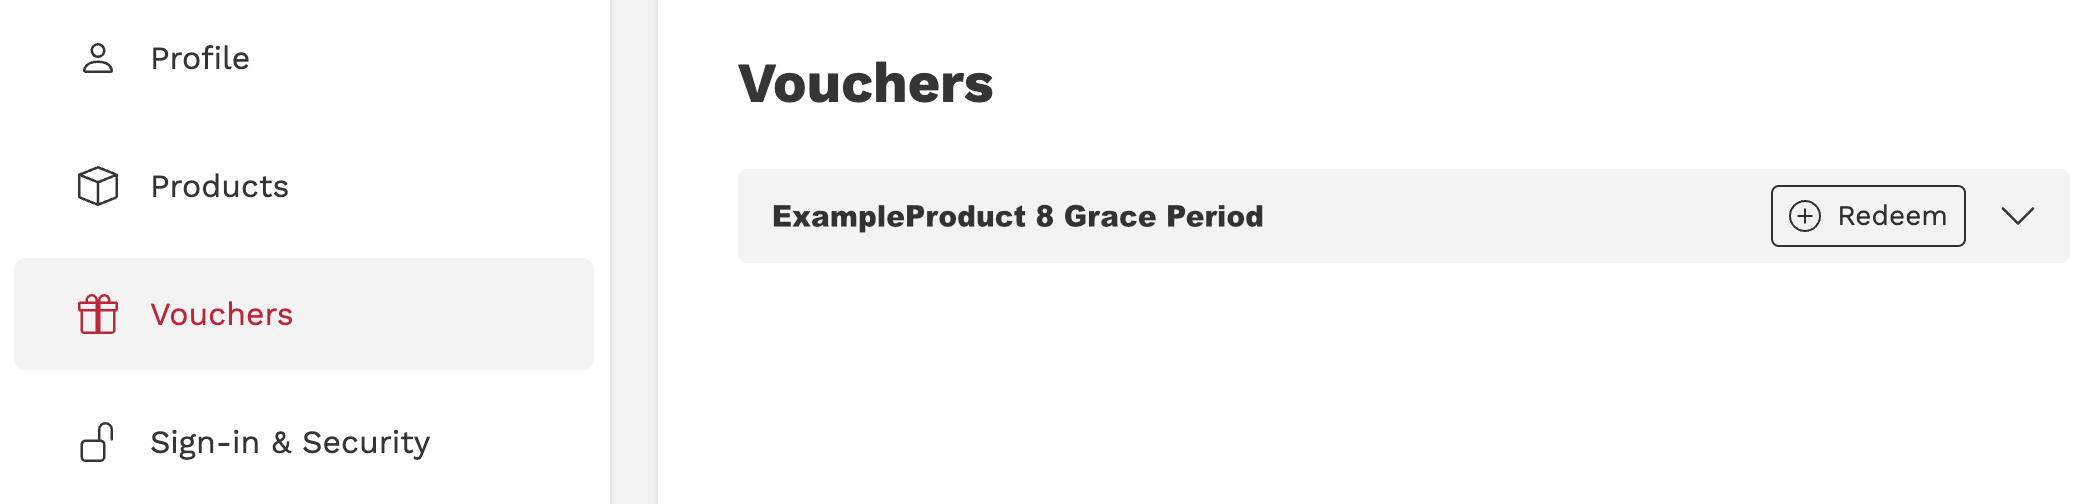 example-product-grace-period.png